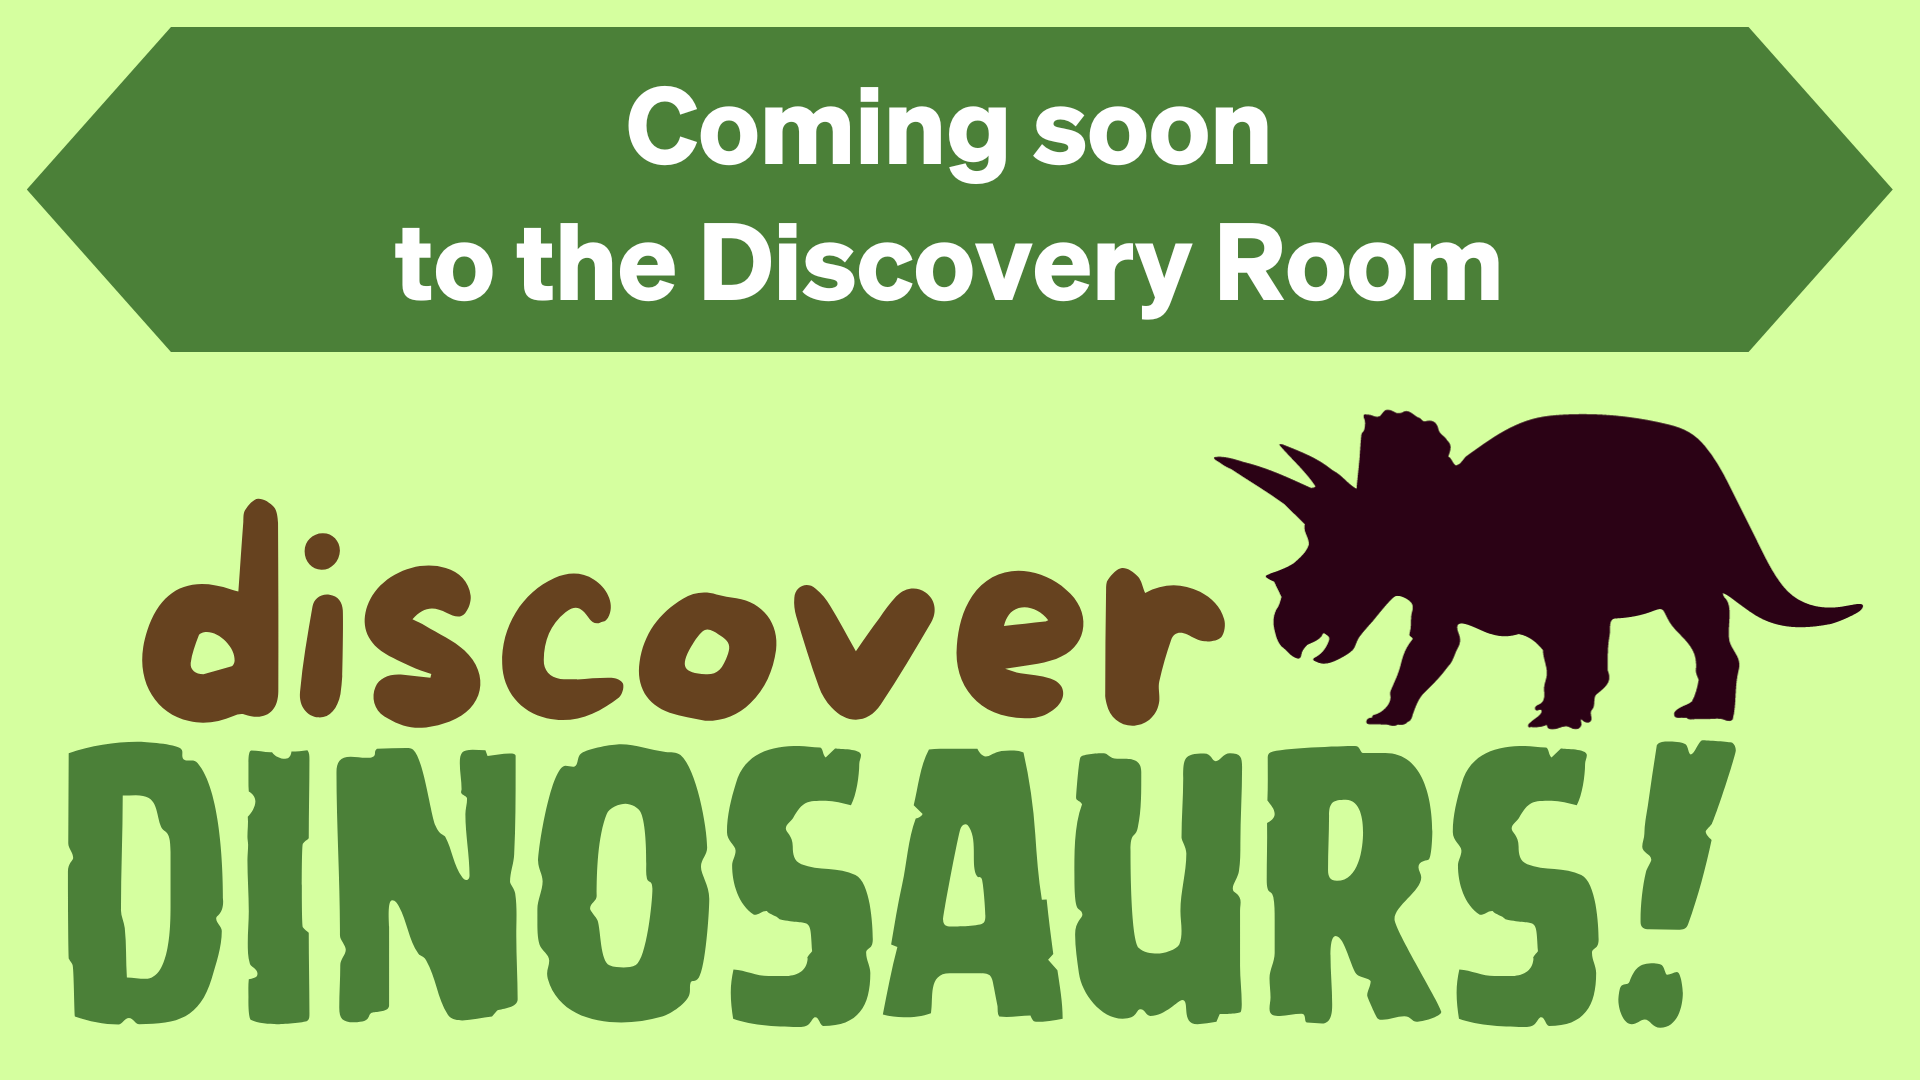 Coming soon to the Discovery Room - Discover Dinosaurs